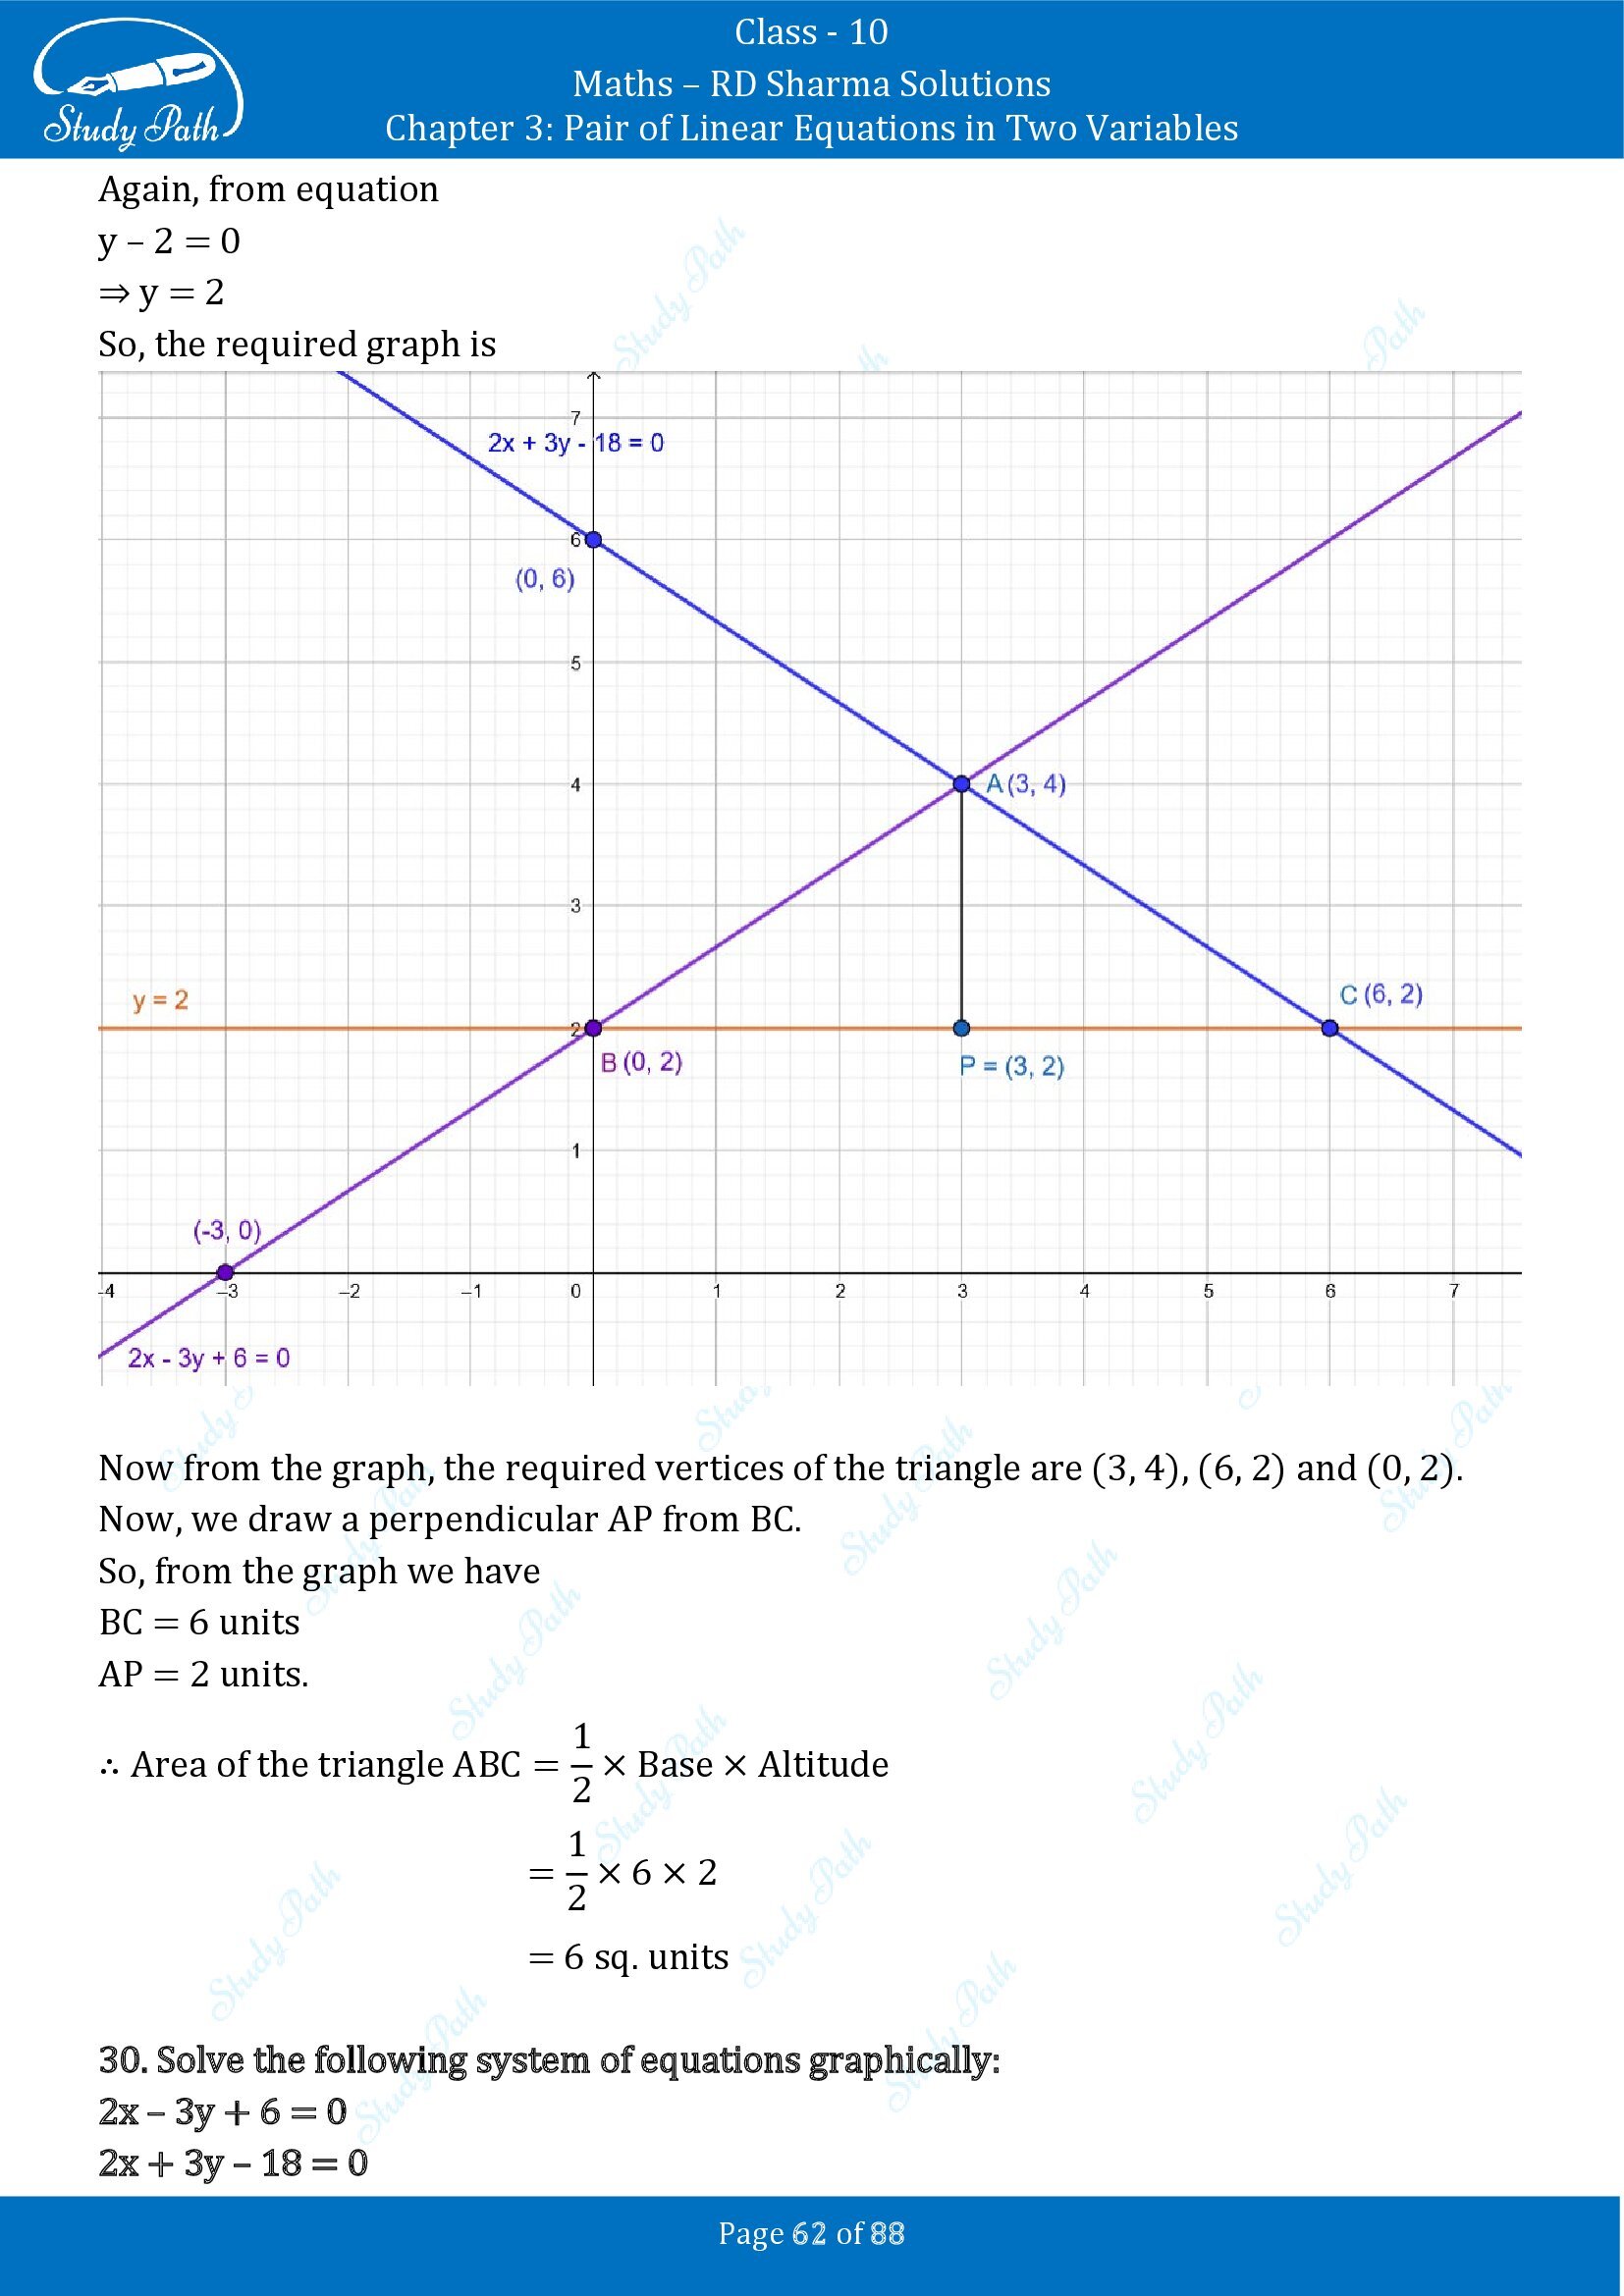 RD Sharma Solutions Class 10 Chapter 3 Pair of Linear Equations in Two Variables Exercise 3.2 00062